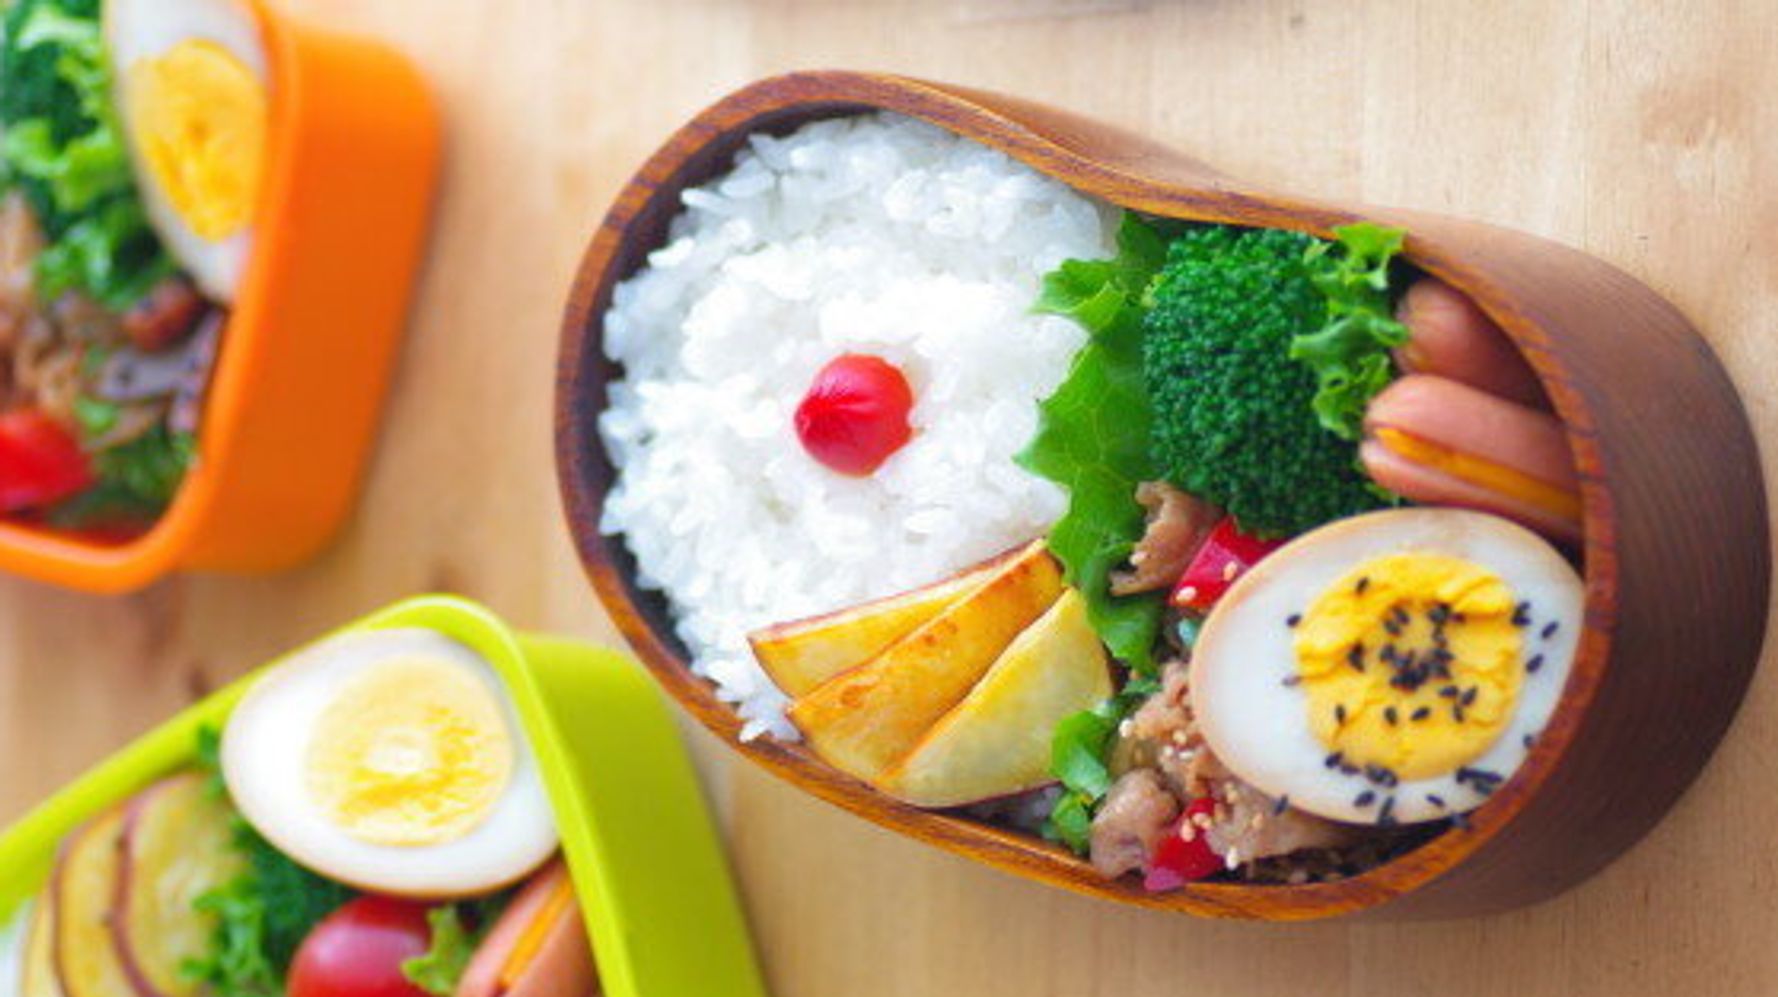 Healthy Snacks: 14 Yummy Lunch Box Ideas Your Kids Will Love | HuffPost